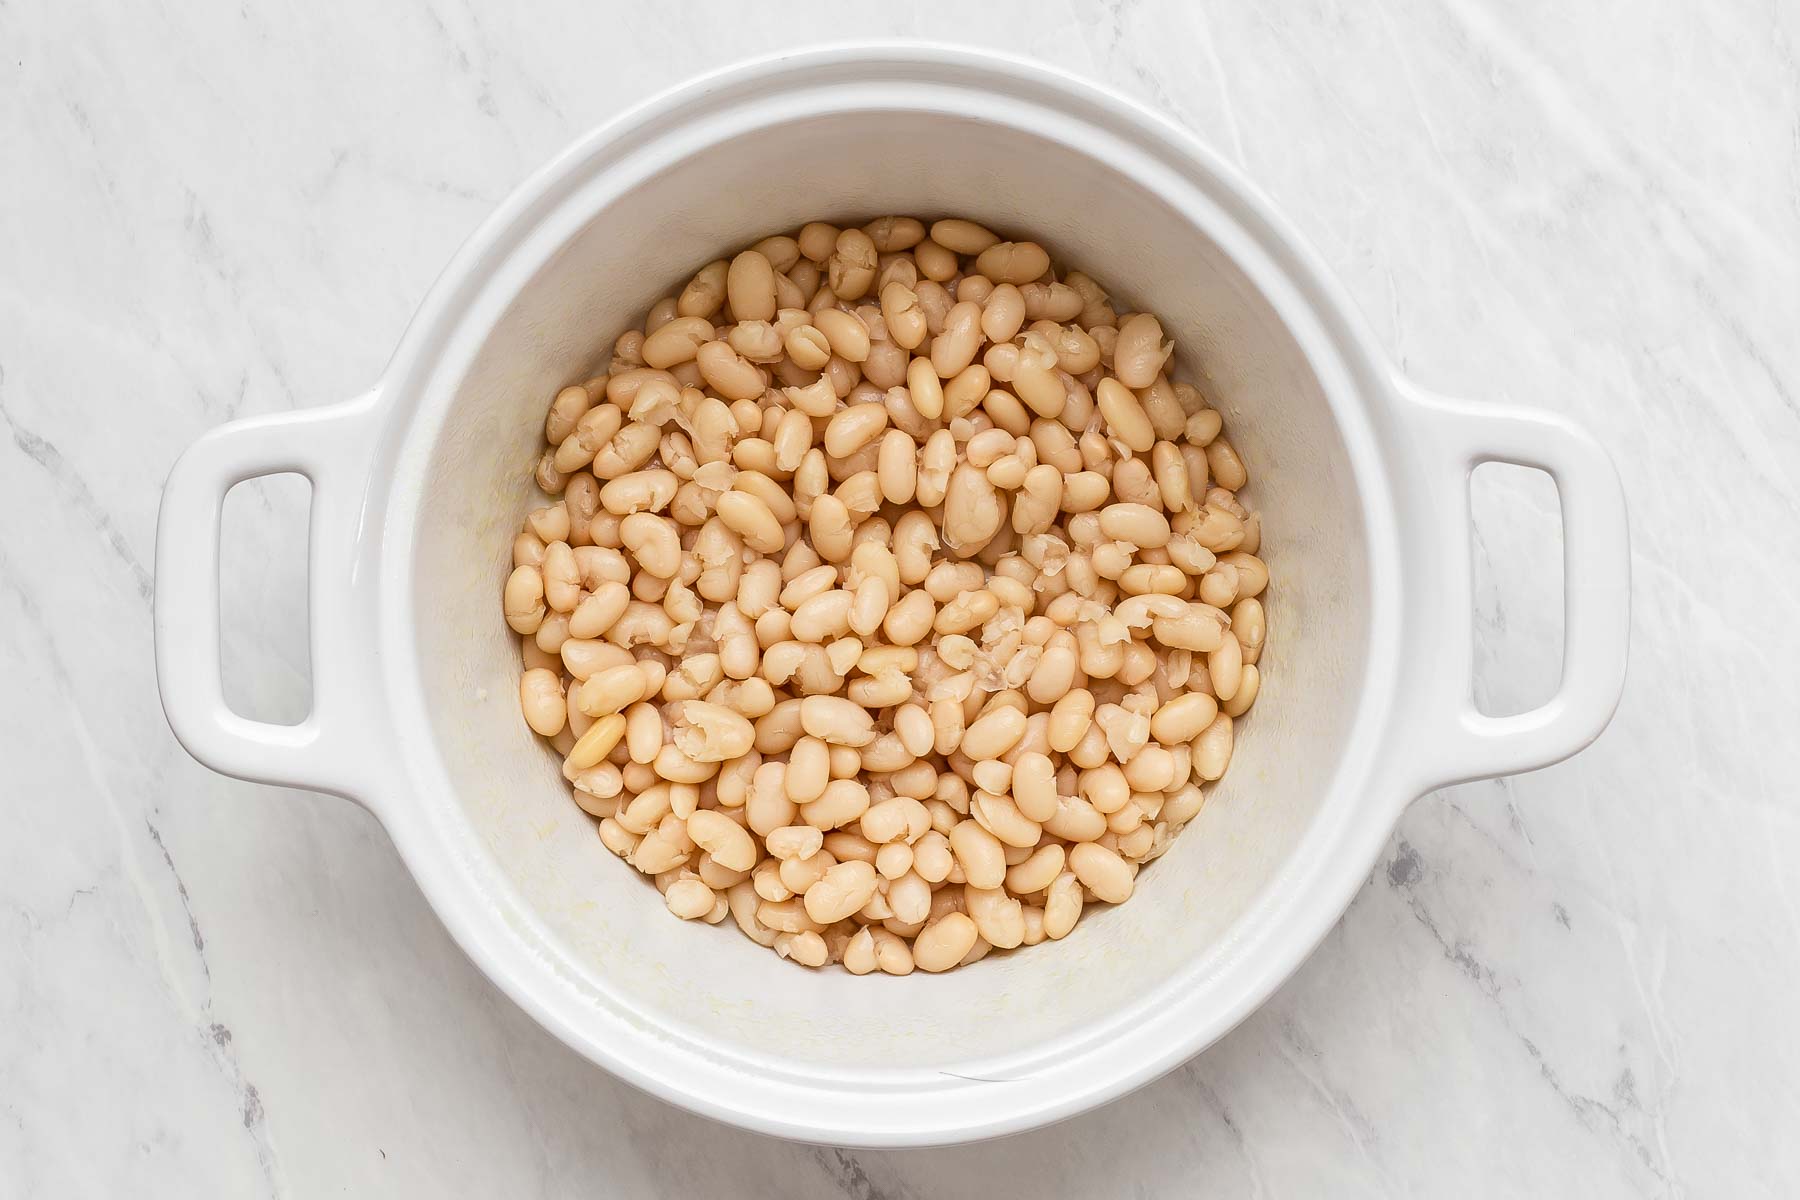 Freshly cooked white beans in round white casserole dish.